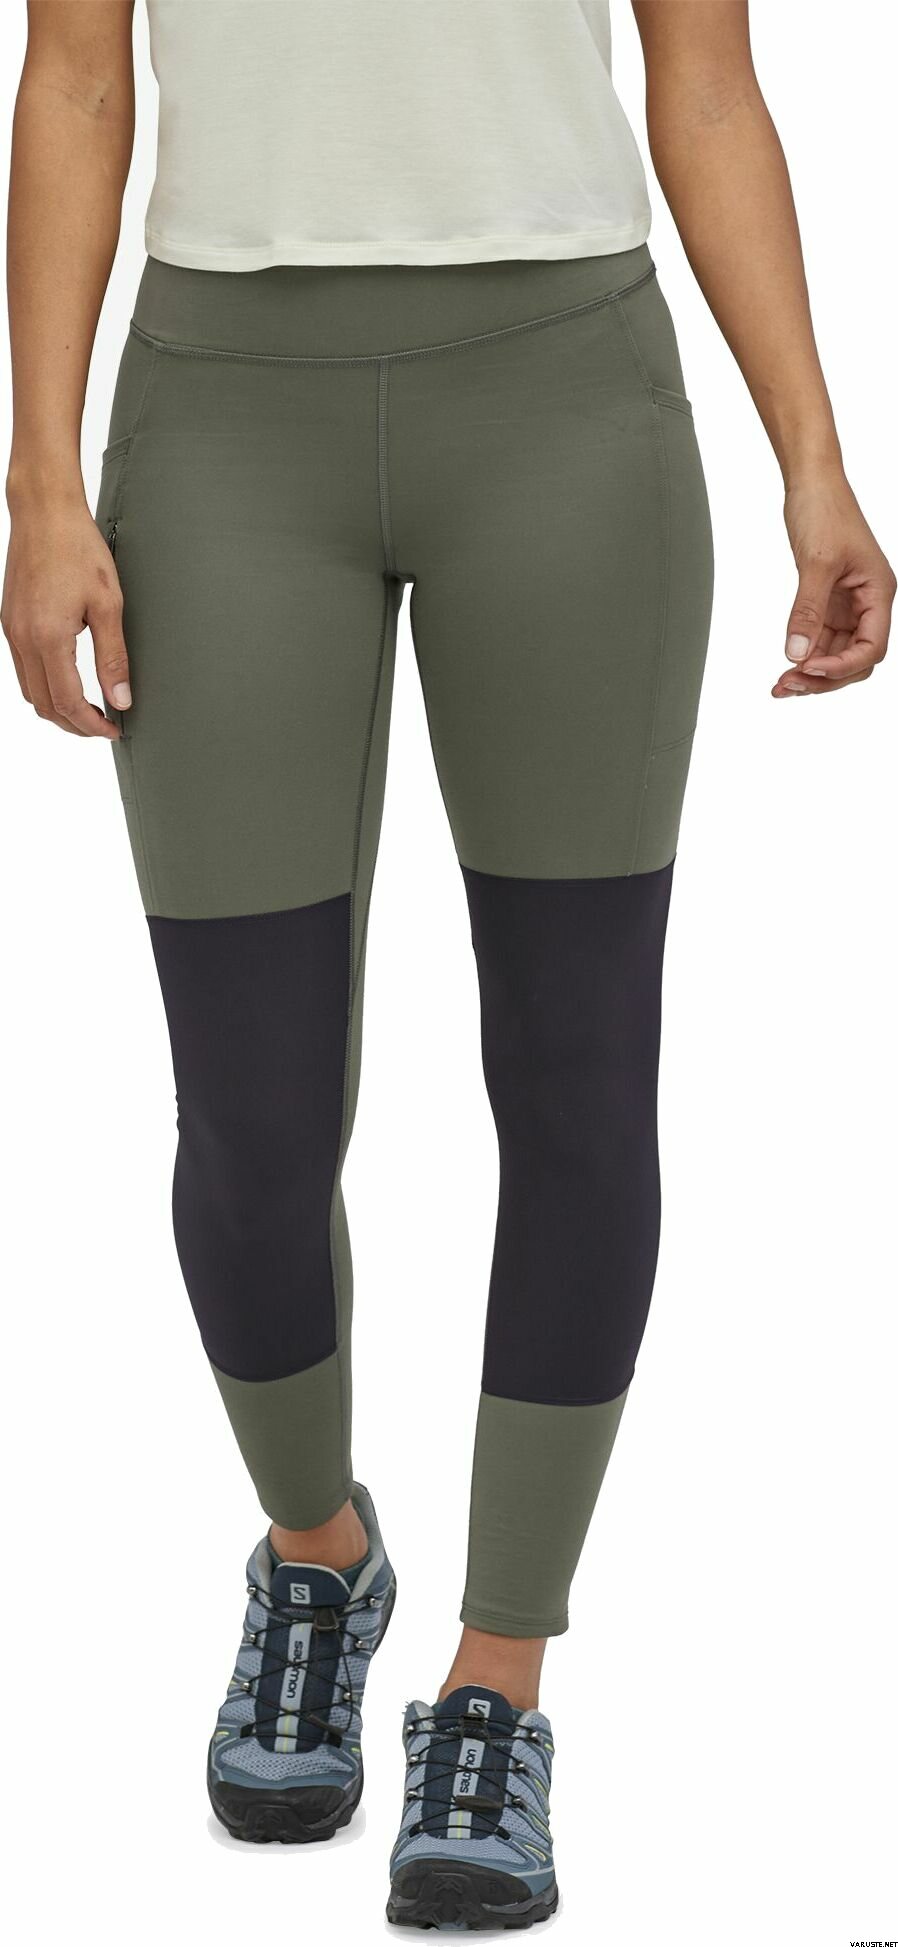 Patagonia Pack Out Hike Tights Womens, Women's Trekking Pants